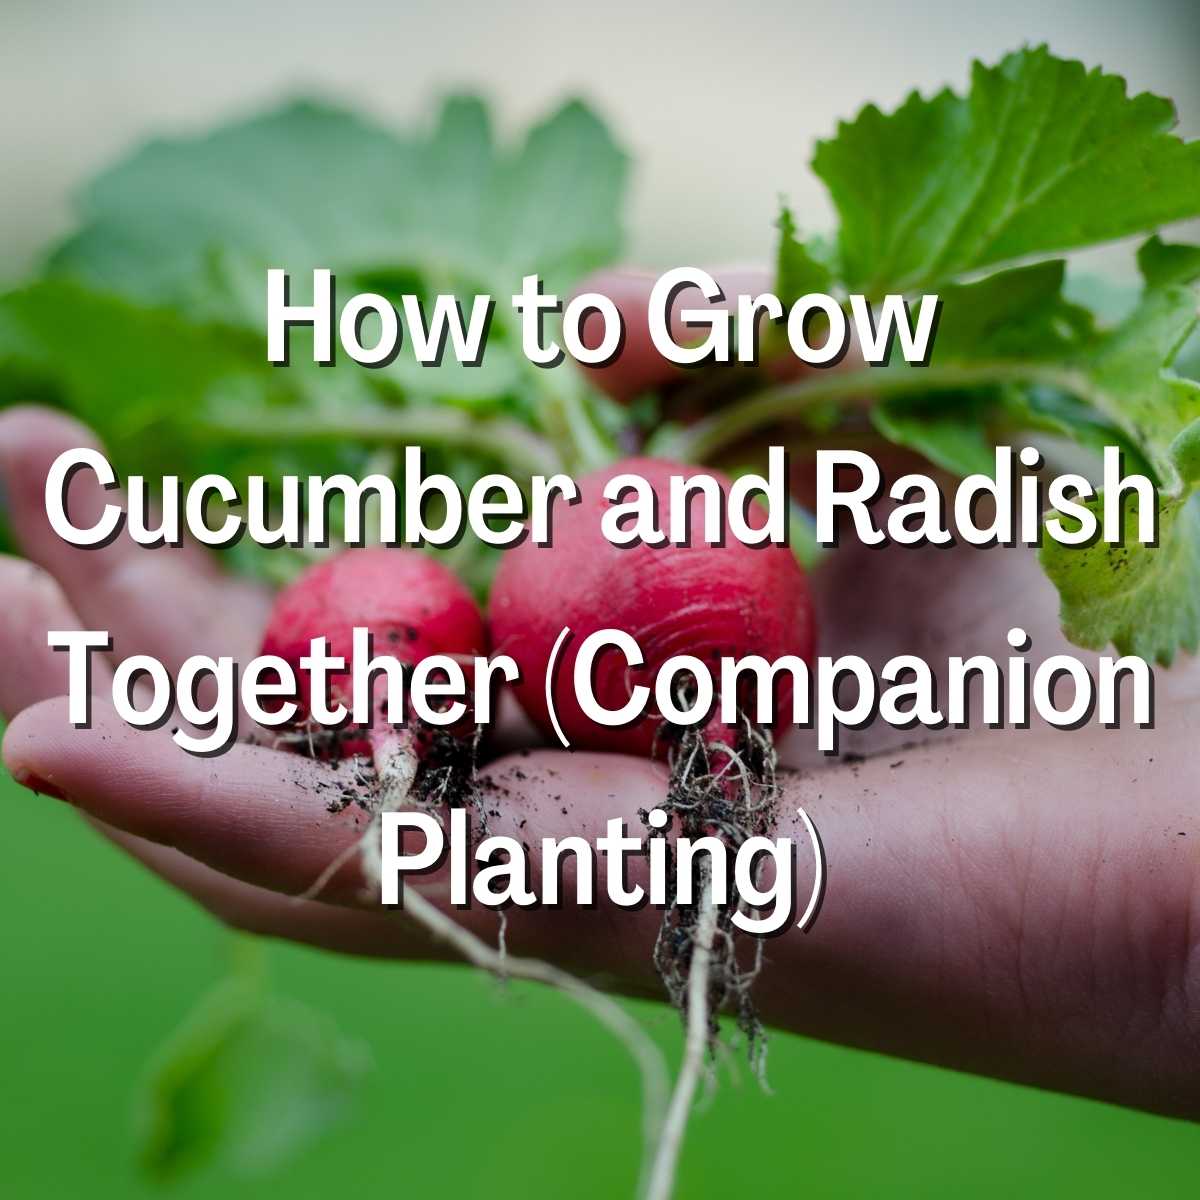 How to Grow Cucumber and Radish Together